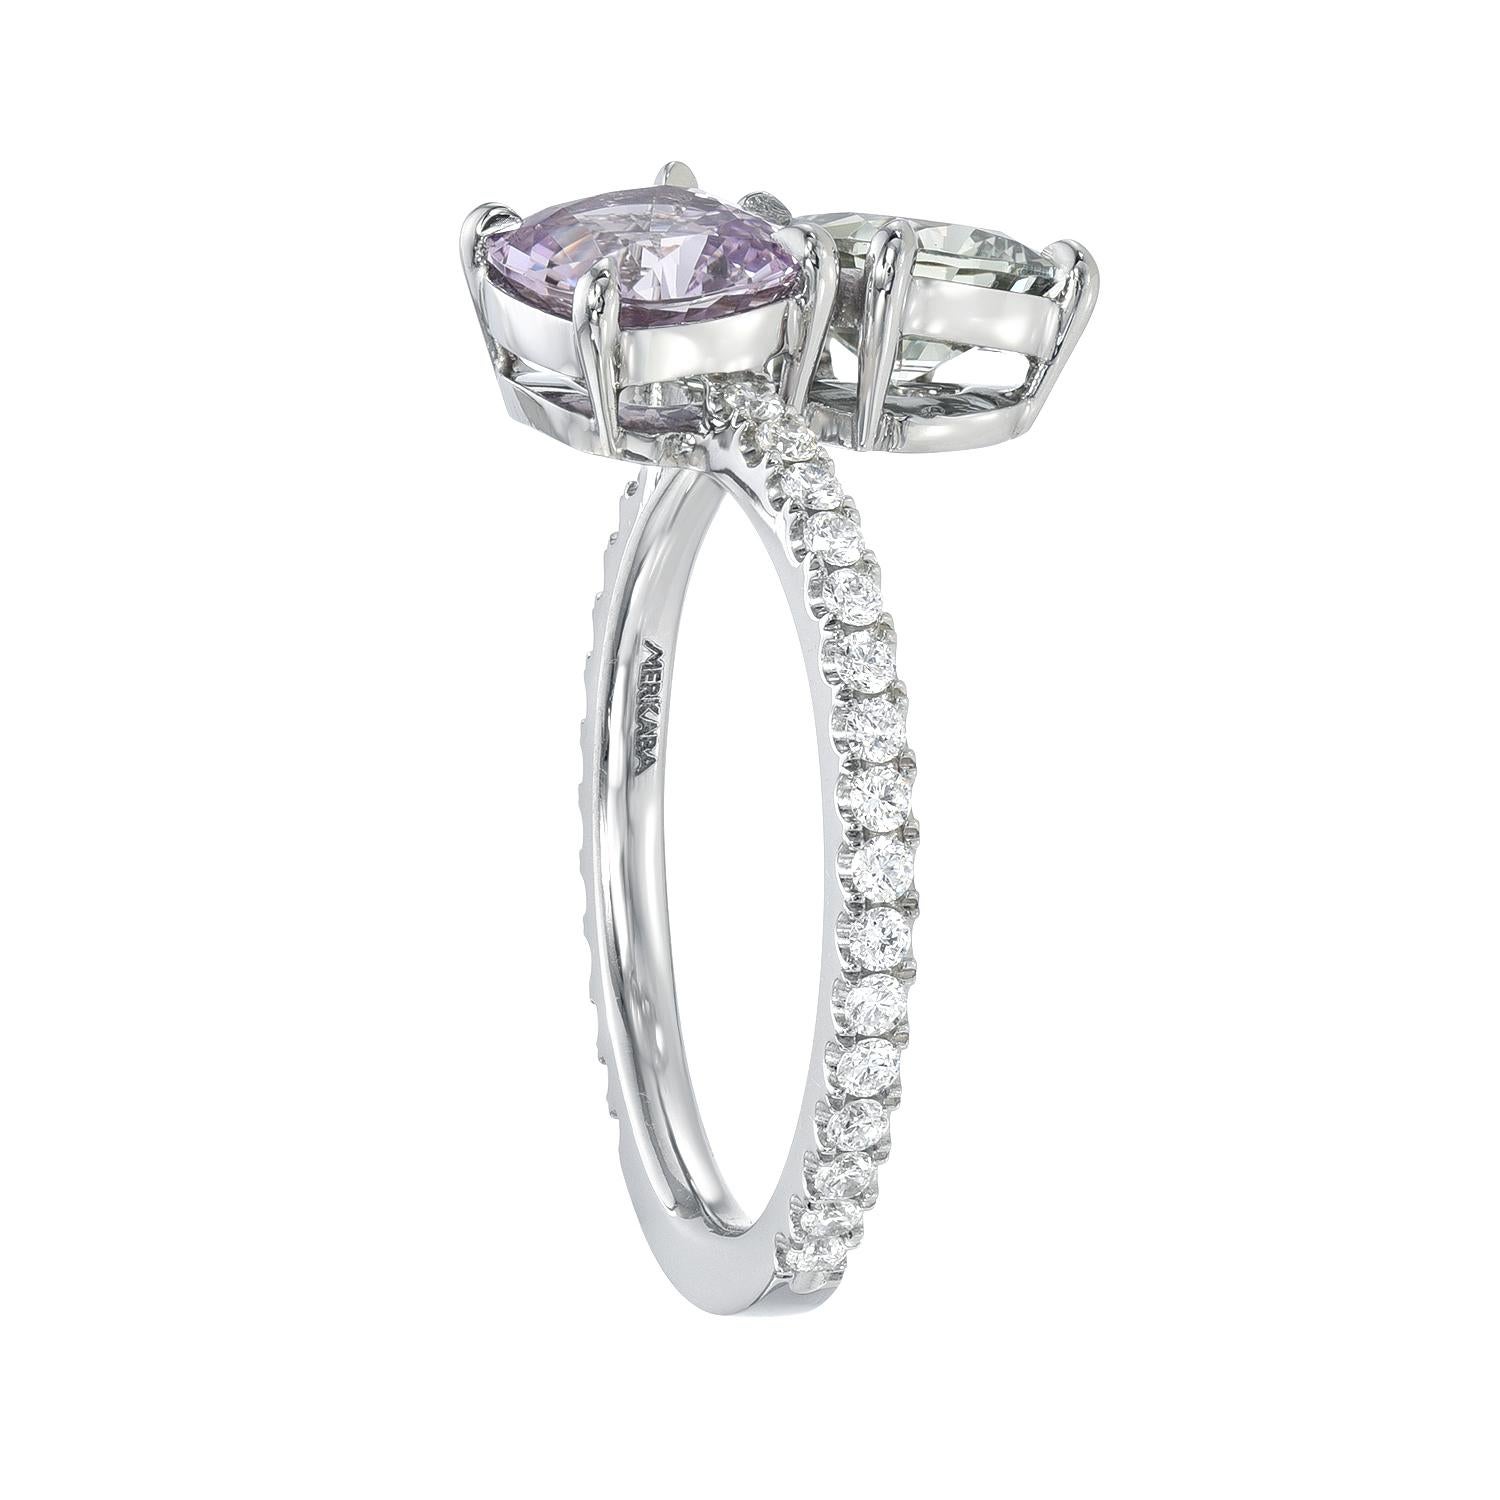 Inseparable, unheated fancy green and violet Sapphire mismatched pair, totaling 2.25 carats, are decorated with round brilliant collection diamonds, totaling 0.32 carats, in this unique platinum ring.
Size 6. Re-sizing is complimentary upon